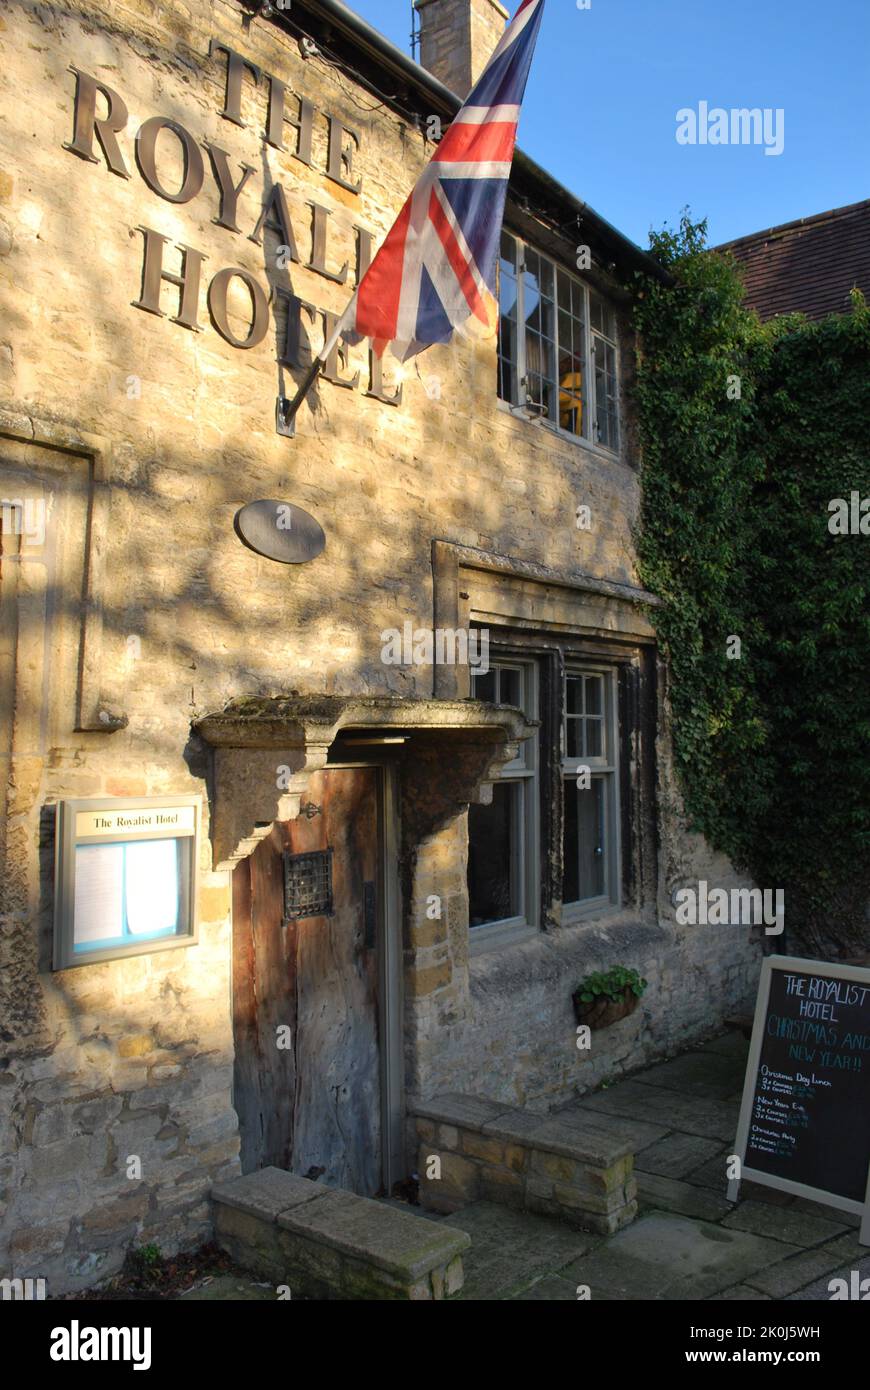 The Royalist Hotel with Union Jack in Stow-on-the-Wold, Cotswolds, England Stock Photo